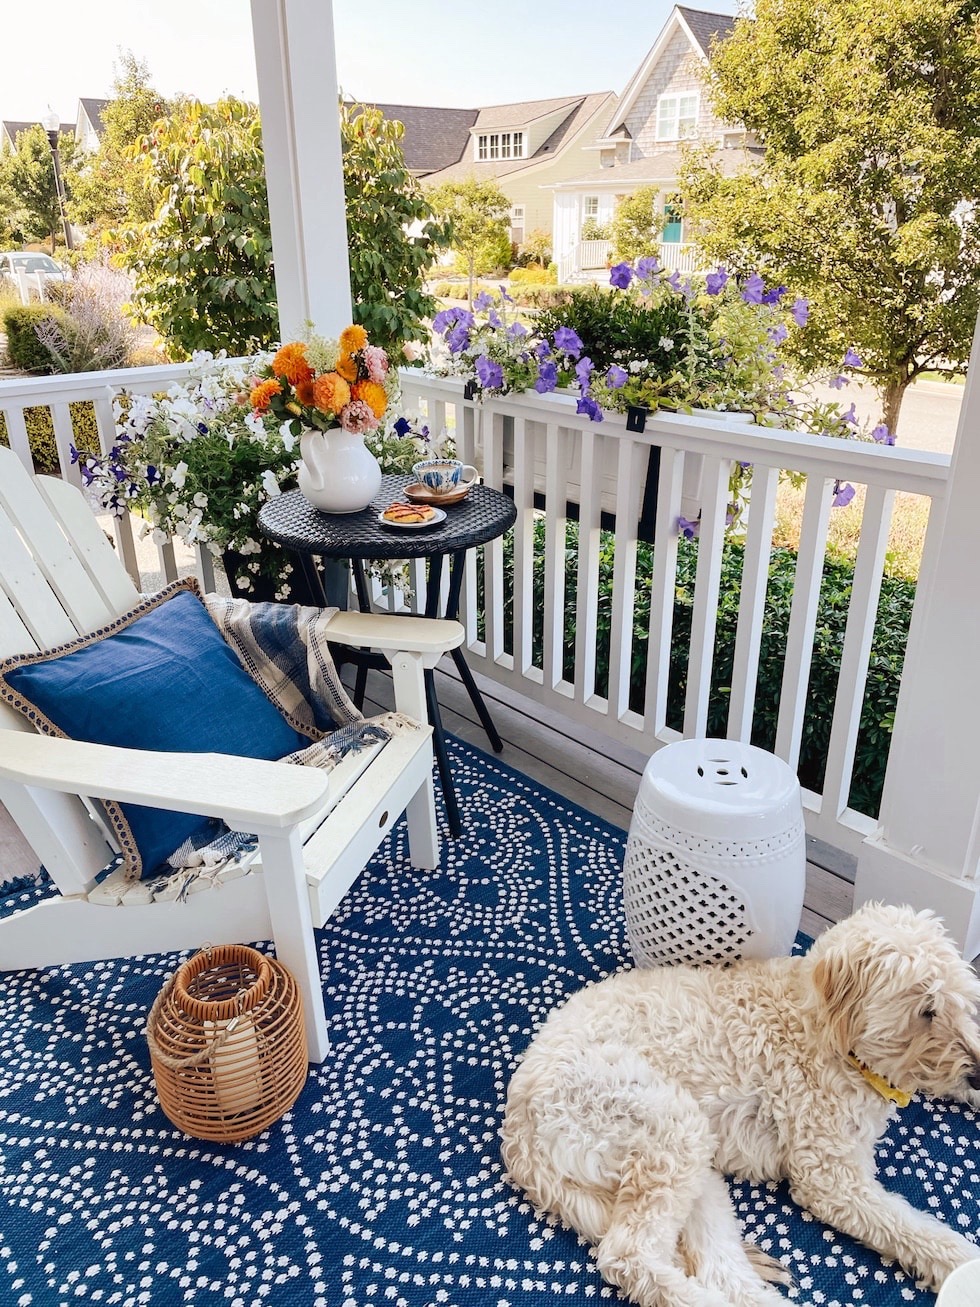 https://theinspiredroom.net/wp-content/uploads/2023/05/front-covered-porch-adirondack-chair-blue-white-rug-cafe-table-inspired-room.jpg